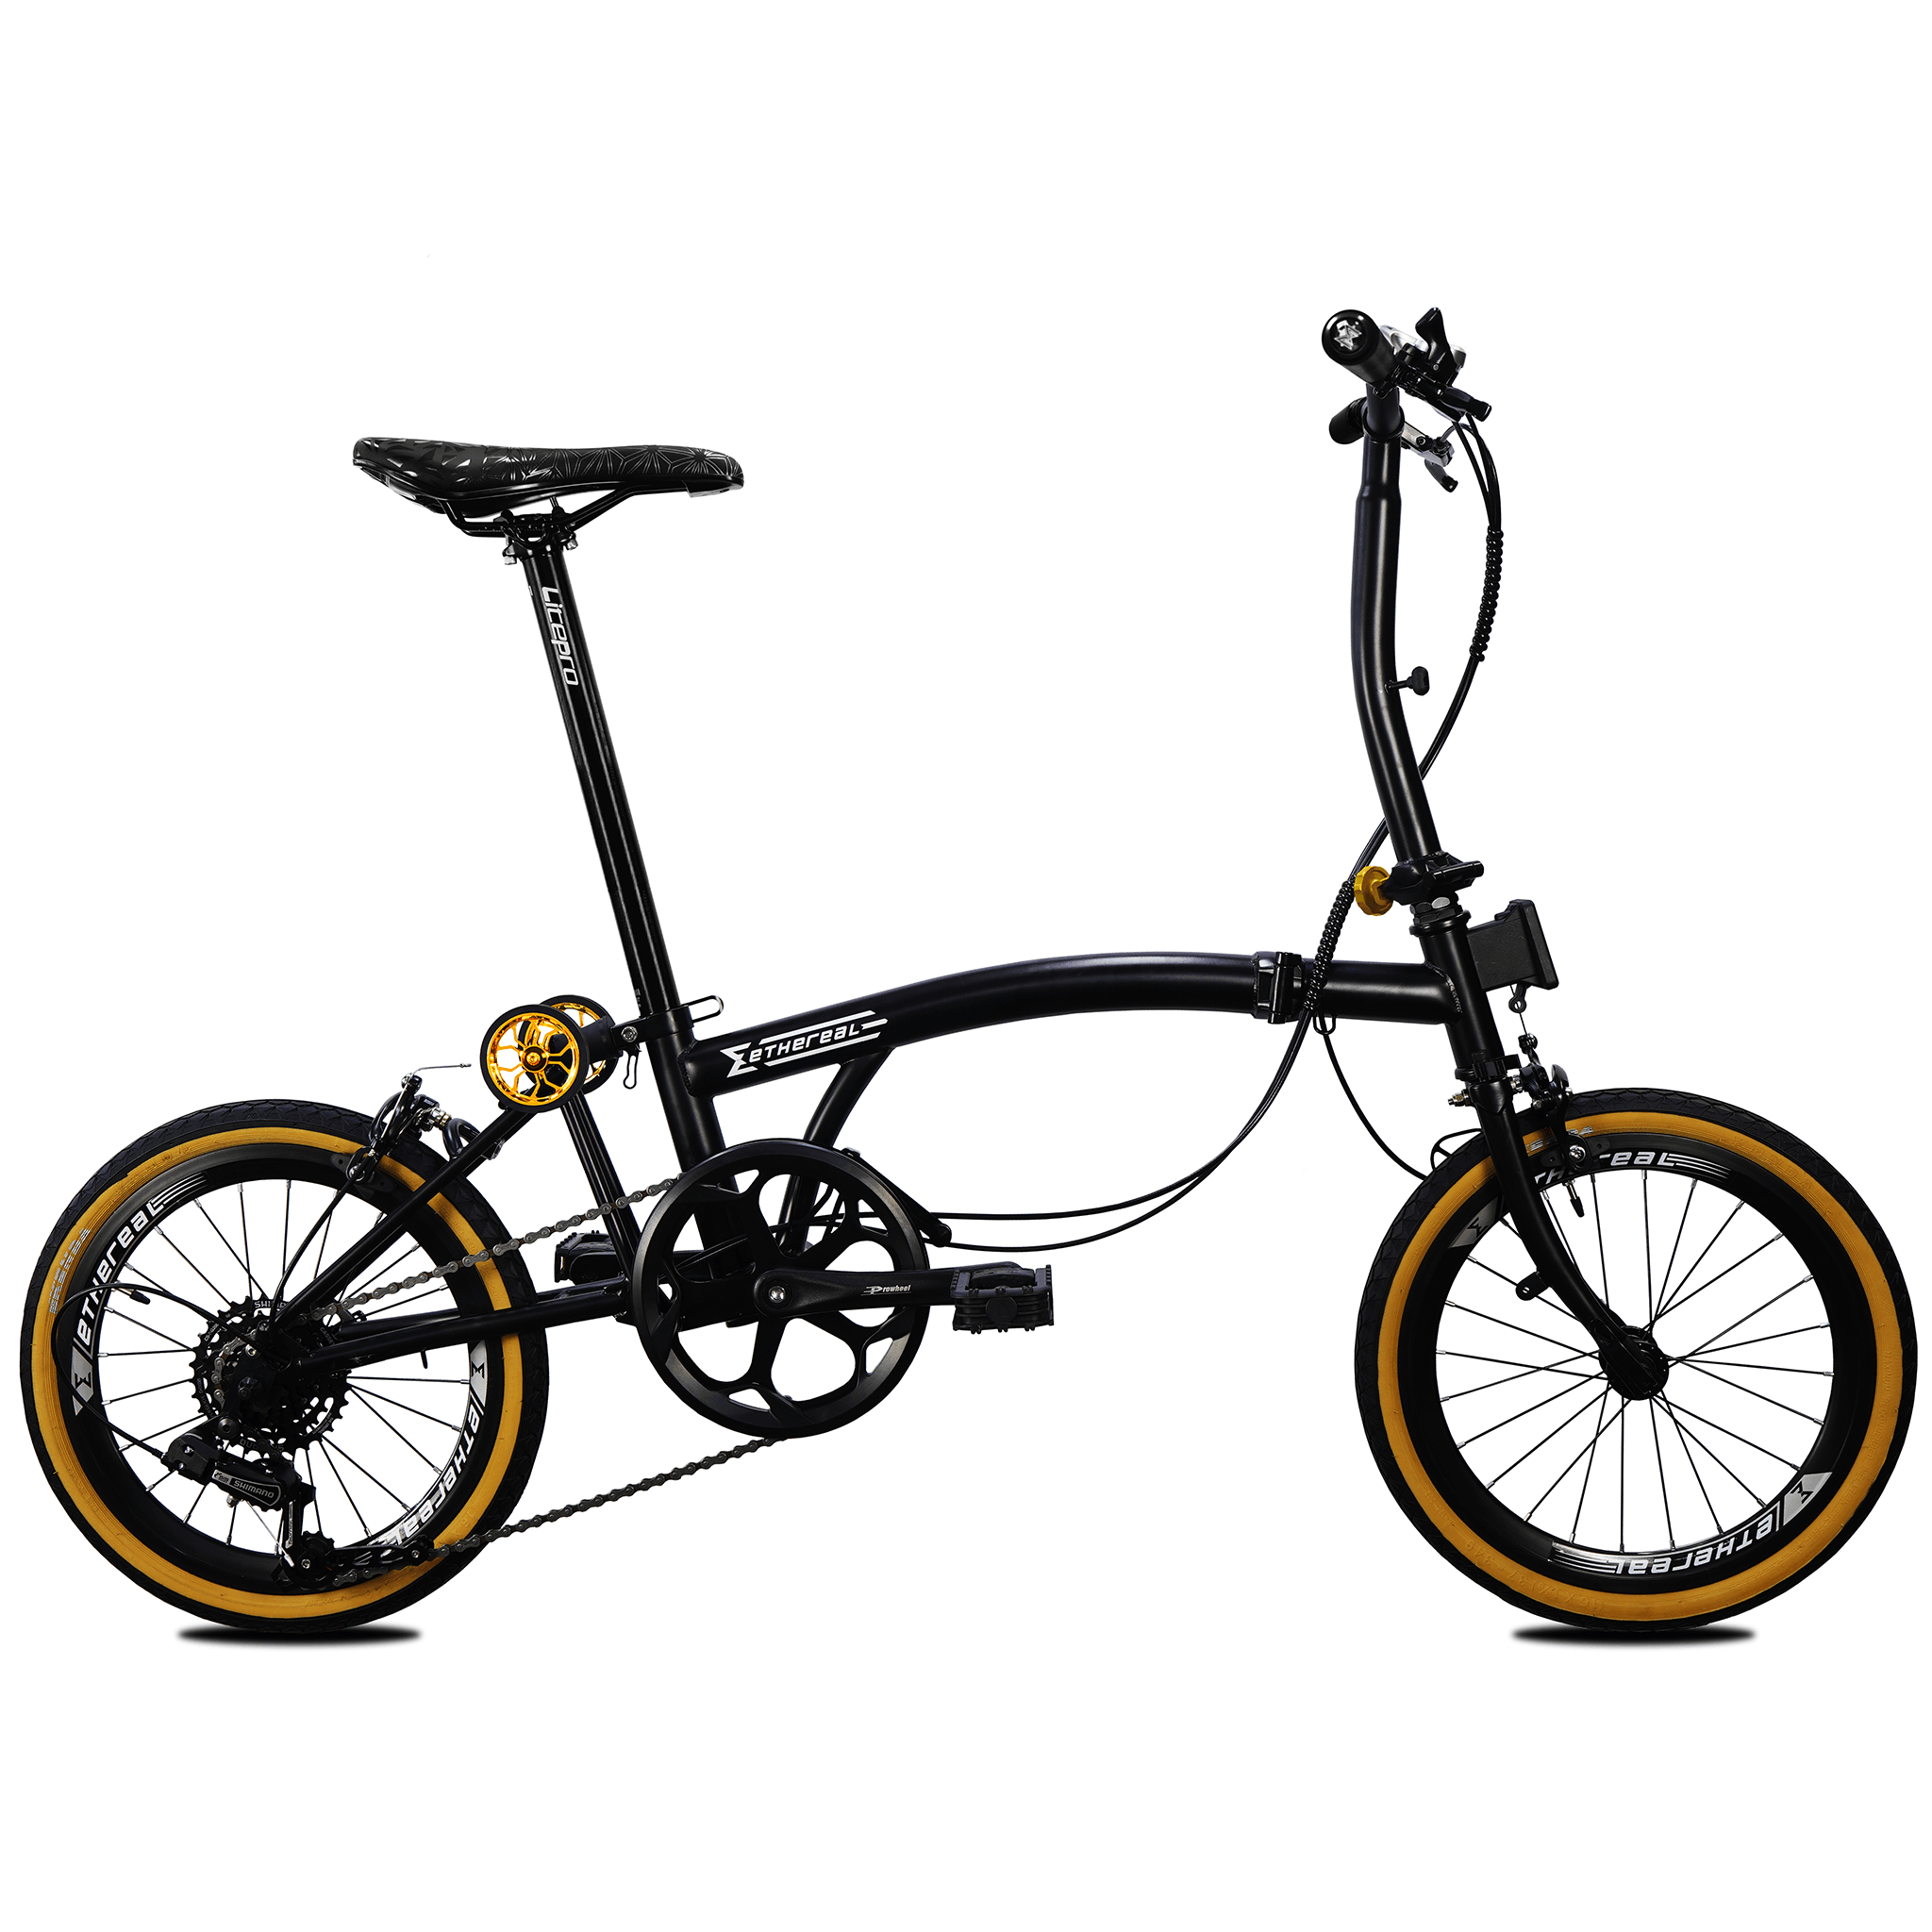 Ethereal Trifold M7 Folding Bike - Affordable Entry-Level Folding Bike with Shimano Tourney 7 Speed, Kenda Tanwall Tires, and Foldable Pedals - The Bike Atrium - Best Bicycle Shop in Singapore